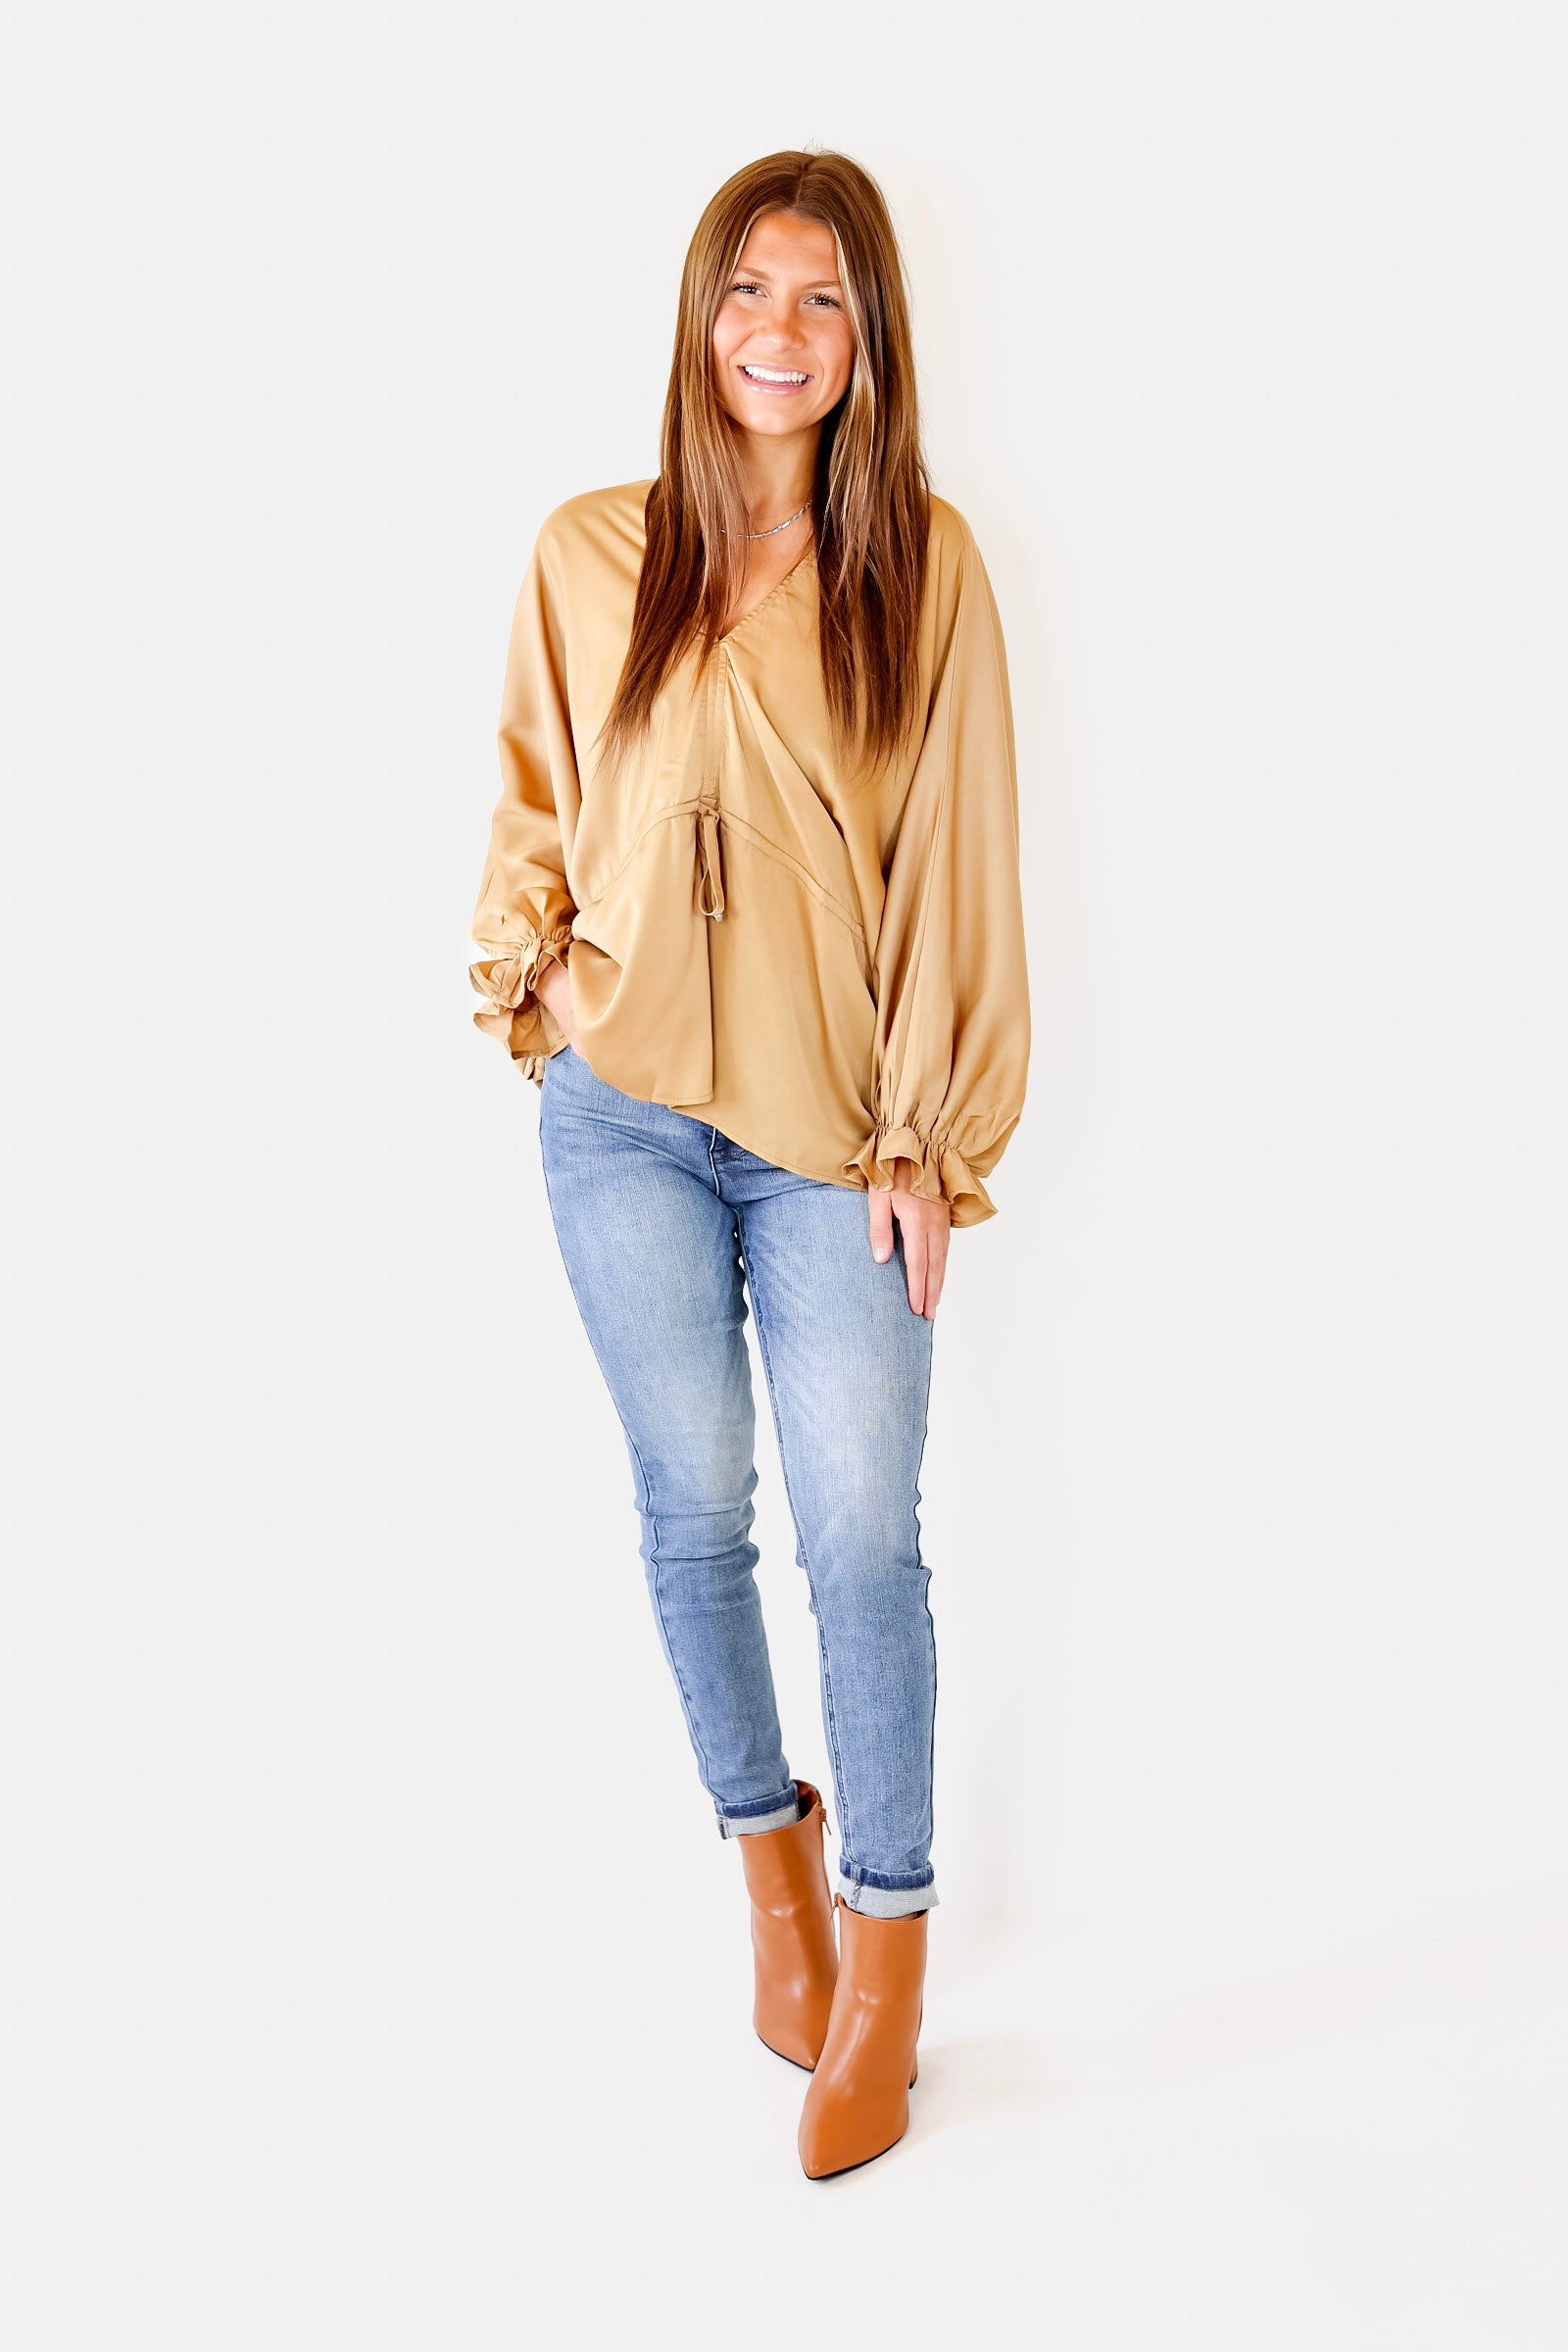 Stating Facts Satin Top with Drawstring Waist in Gold - Giddy Up Glamour Boutique